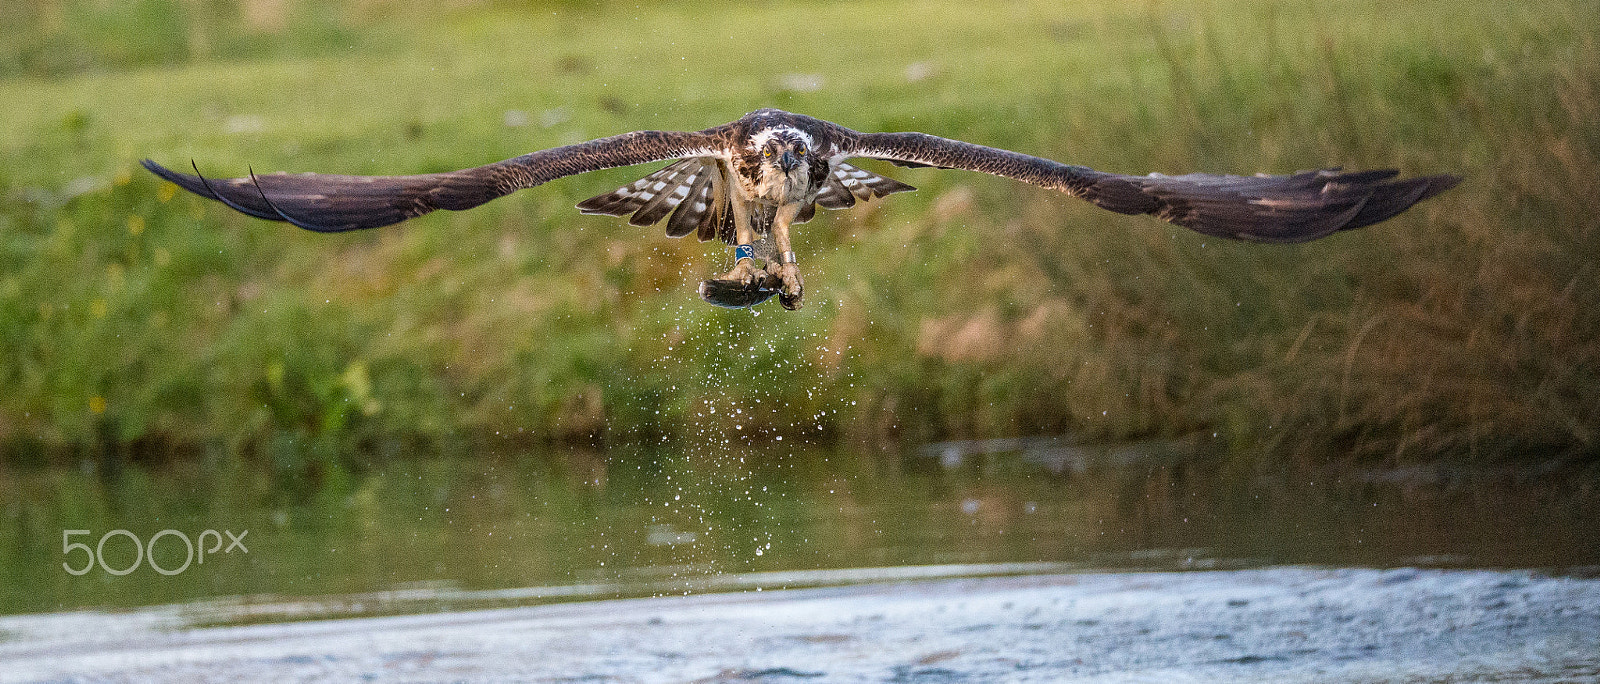 Nikon D610 + Sigma 150-600mm F5-6.3 DG OS HSM | S sample photo. Osprey in flight having caught a trout fish photography